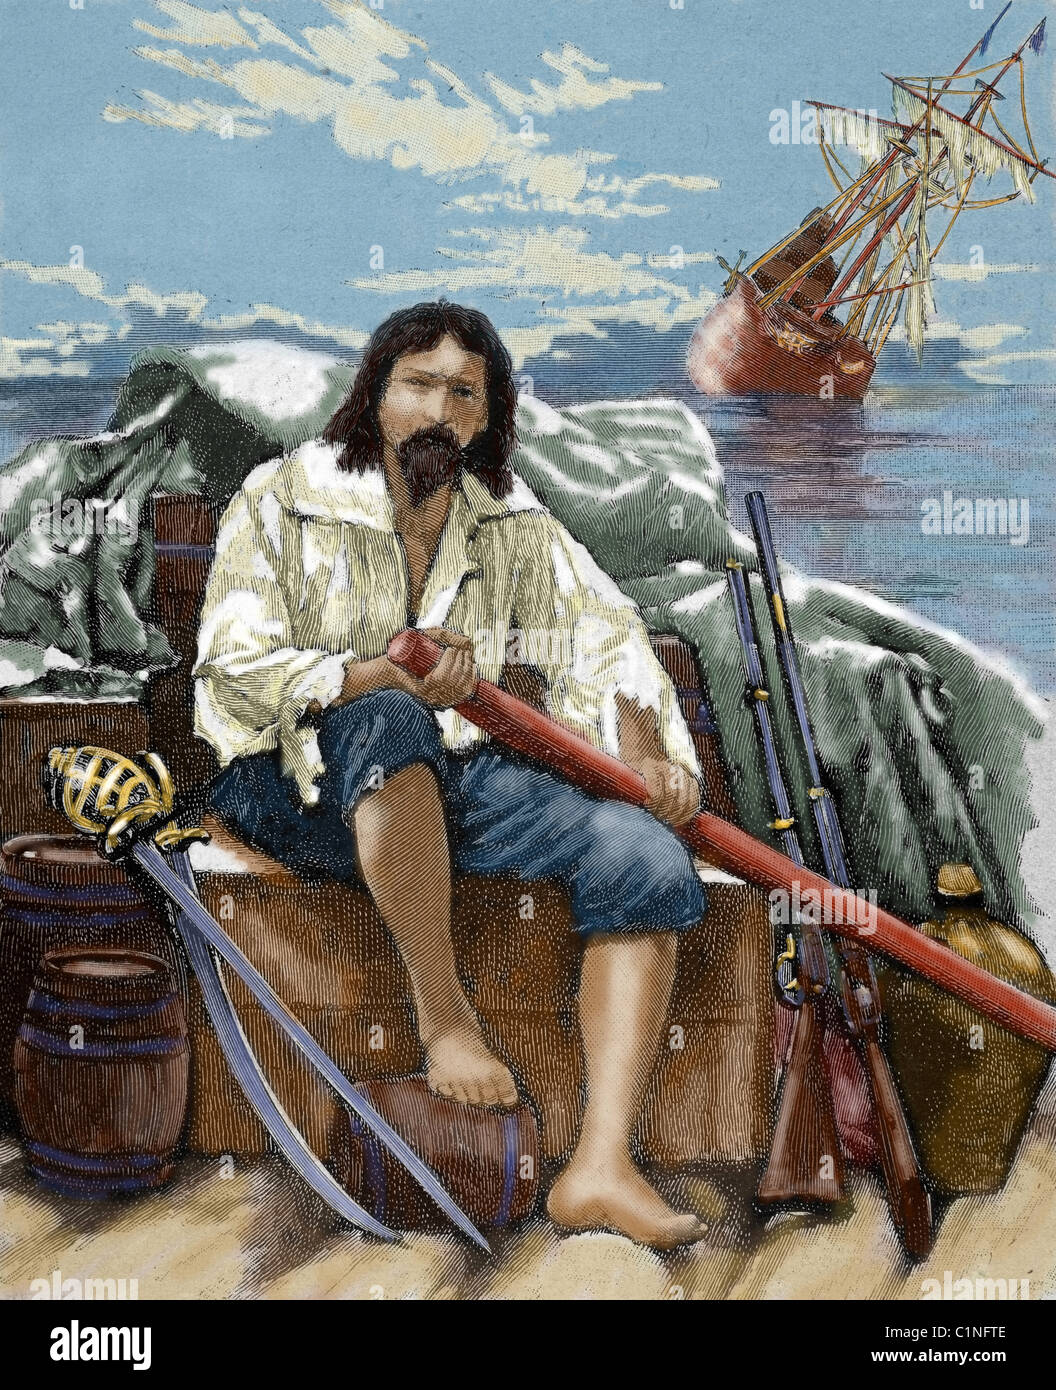 Defoe, Daniel (1660-1731). English novelist. Robinson Crusoe rescuing of the boat all what could be before of its sinking. Stock Photo